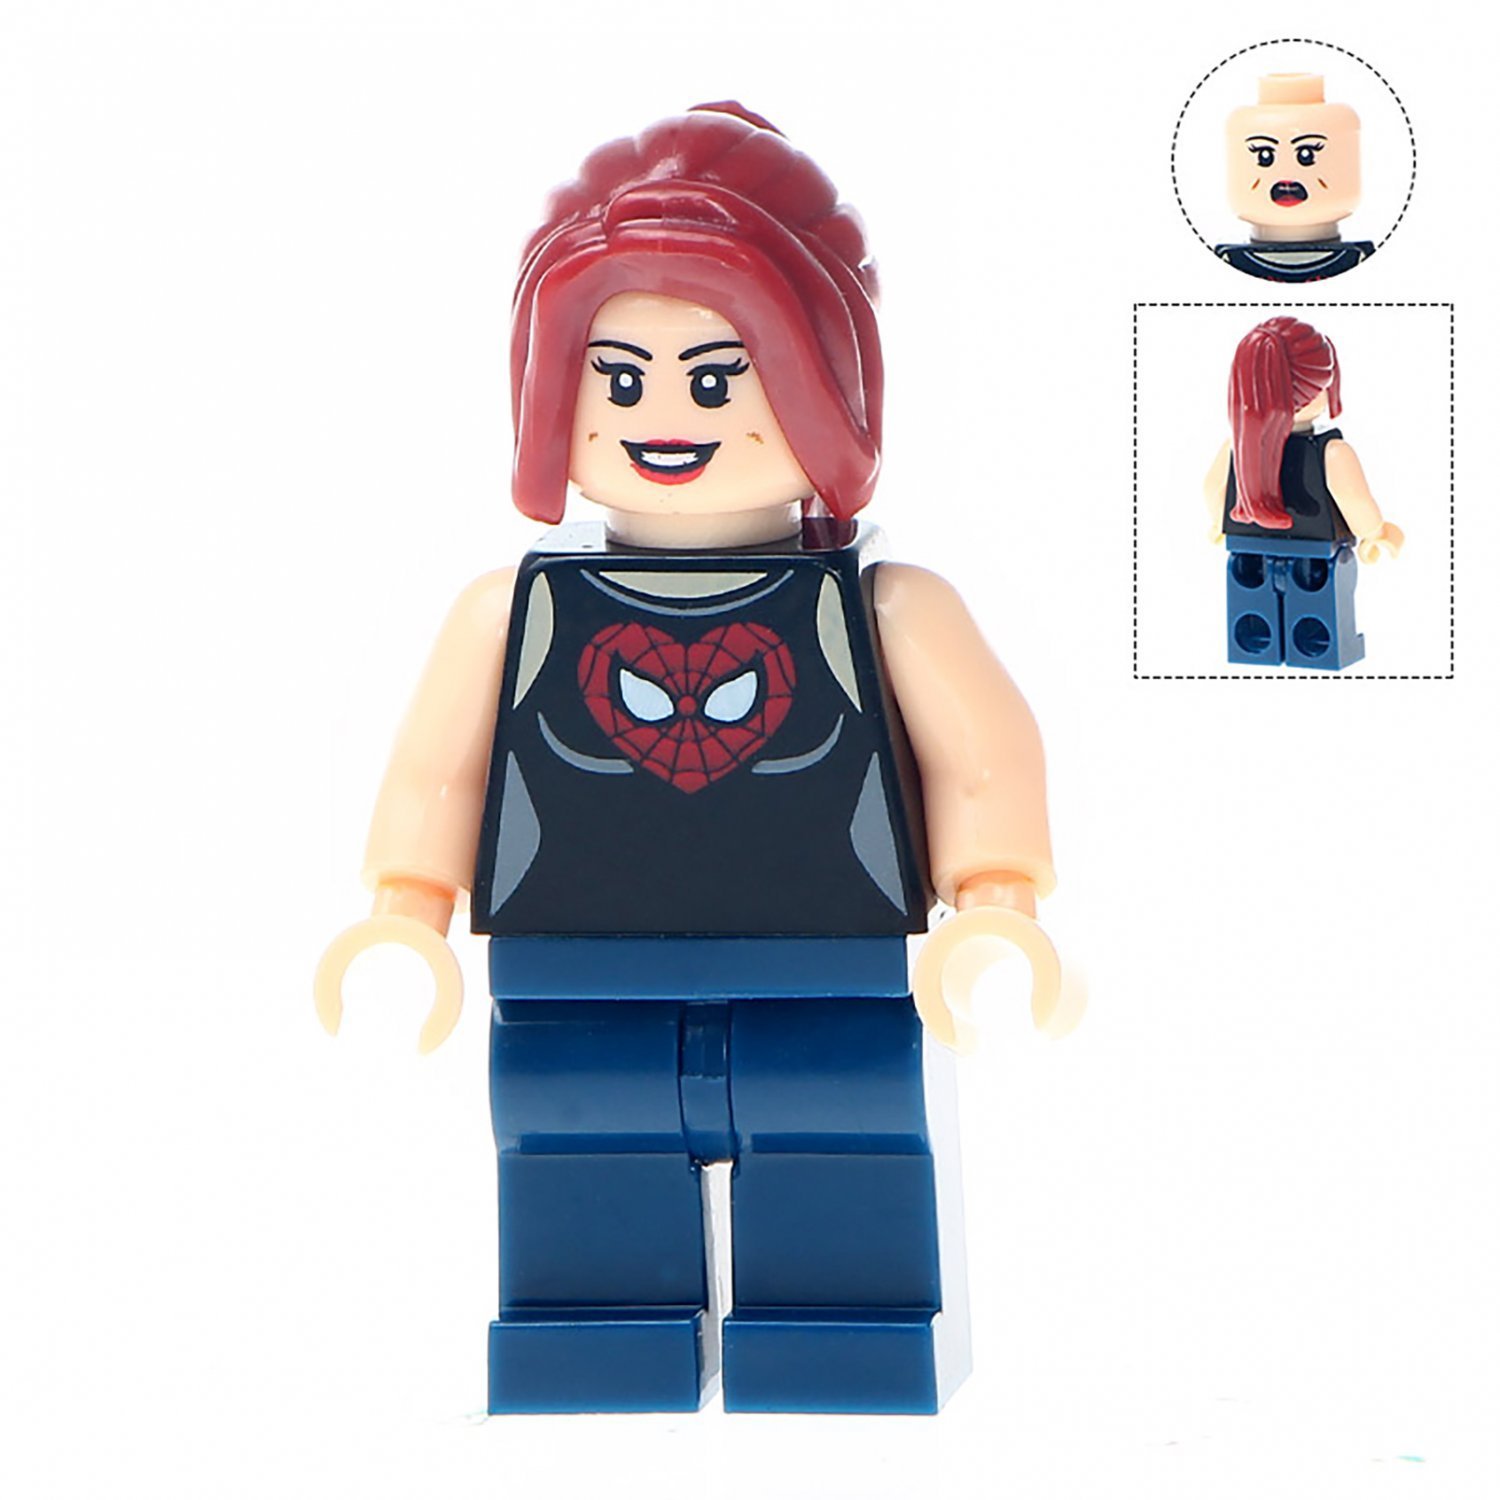 Minifigure Mary Jane Watson from Spier-man Marvel Super Heroes Lego compatible Building Blocks Toys